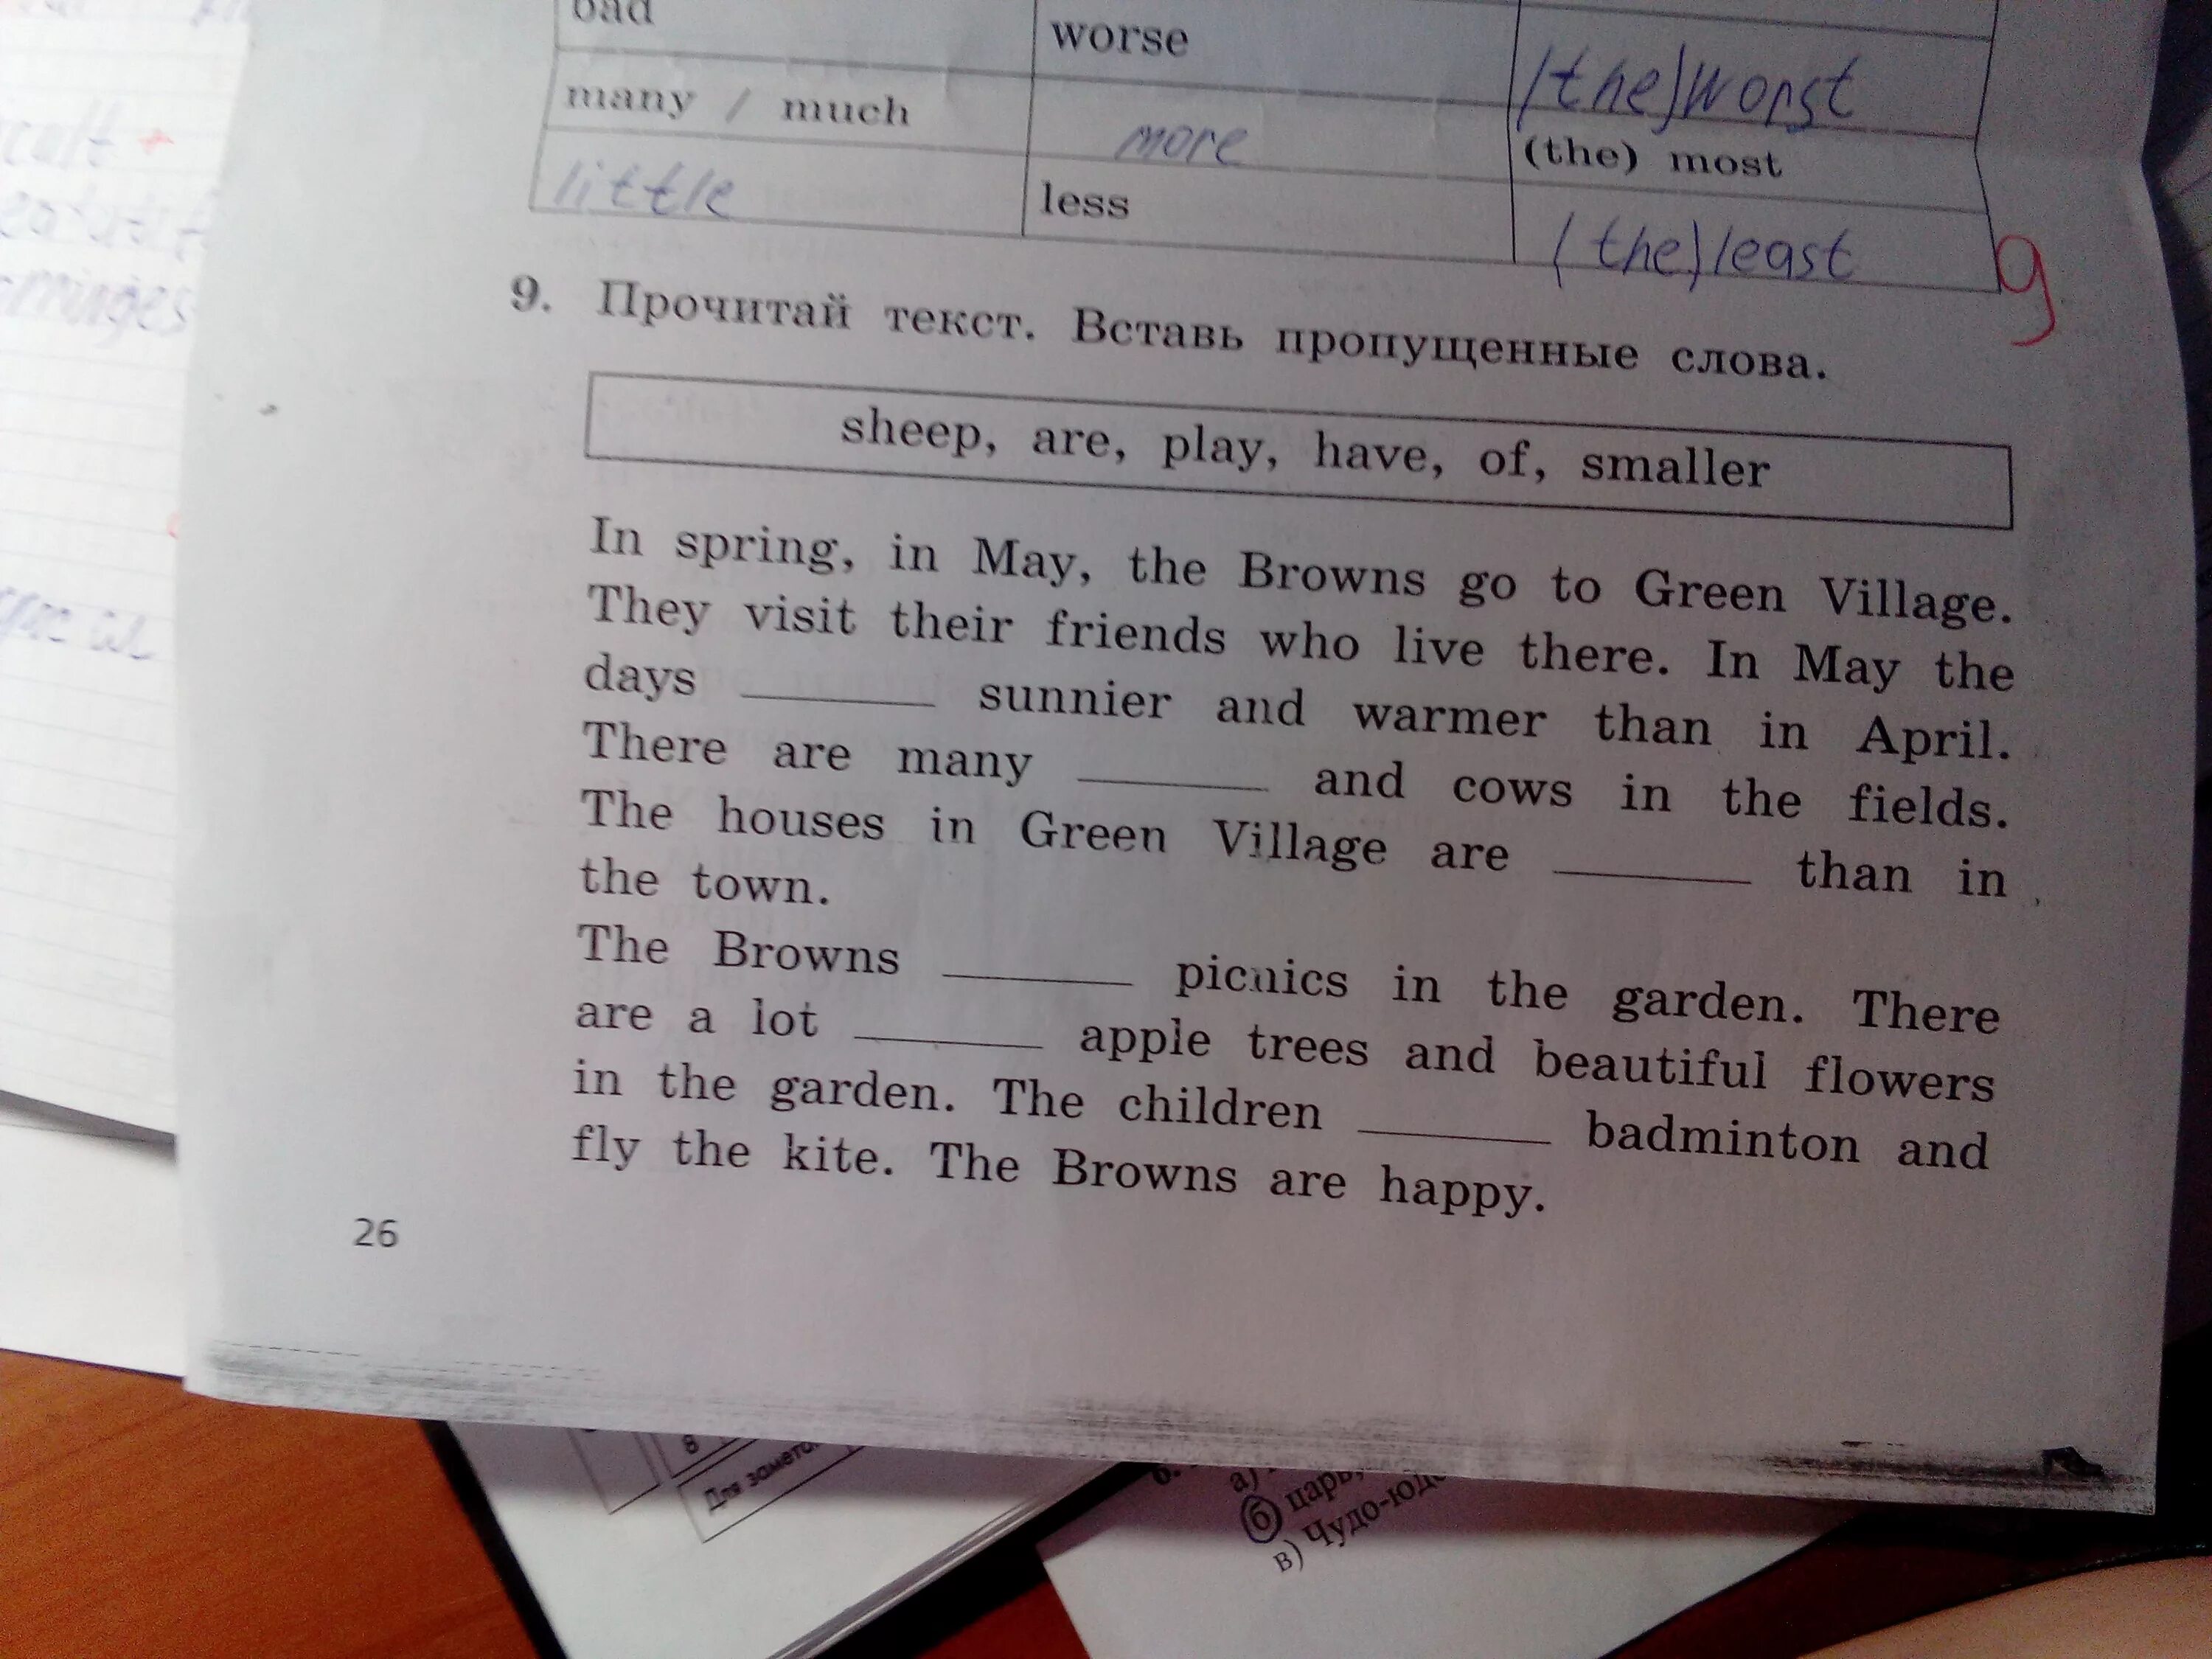 In Spring in May the Browns go to Green Village вставить пропущенные слова. Прочитай текст вставь пропущенные слова. Вставьте пропущенные слова was were. Вставьте пропущенные слова is and are and was and were. Как правильно вставить пропущенные